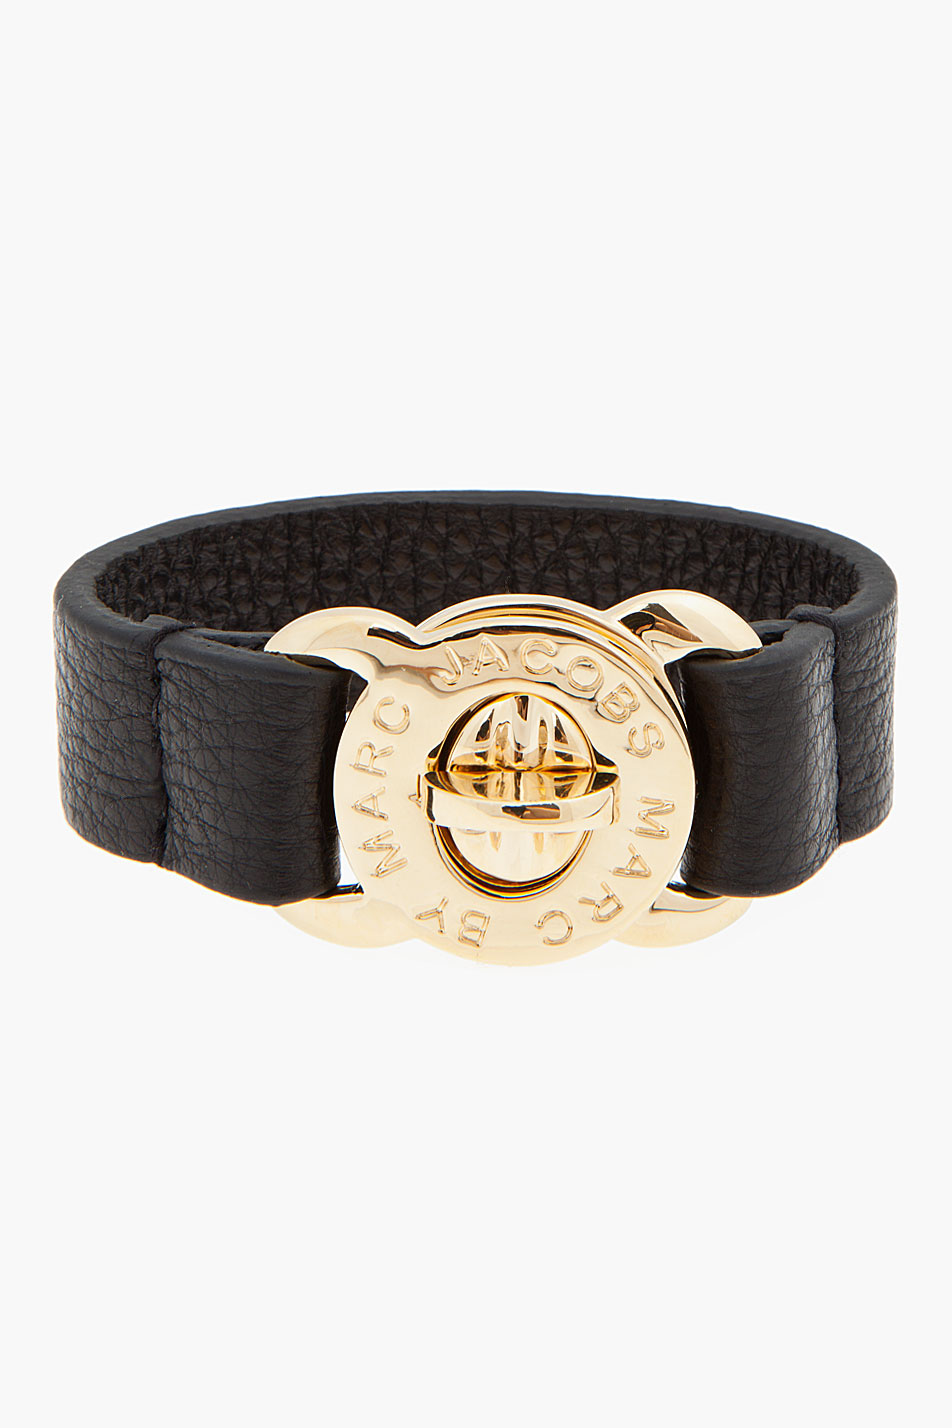 Lyst - Marc by marc jacobs Leather Large Turnlock Bracelet in Metallic